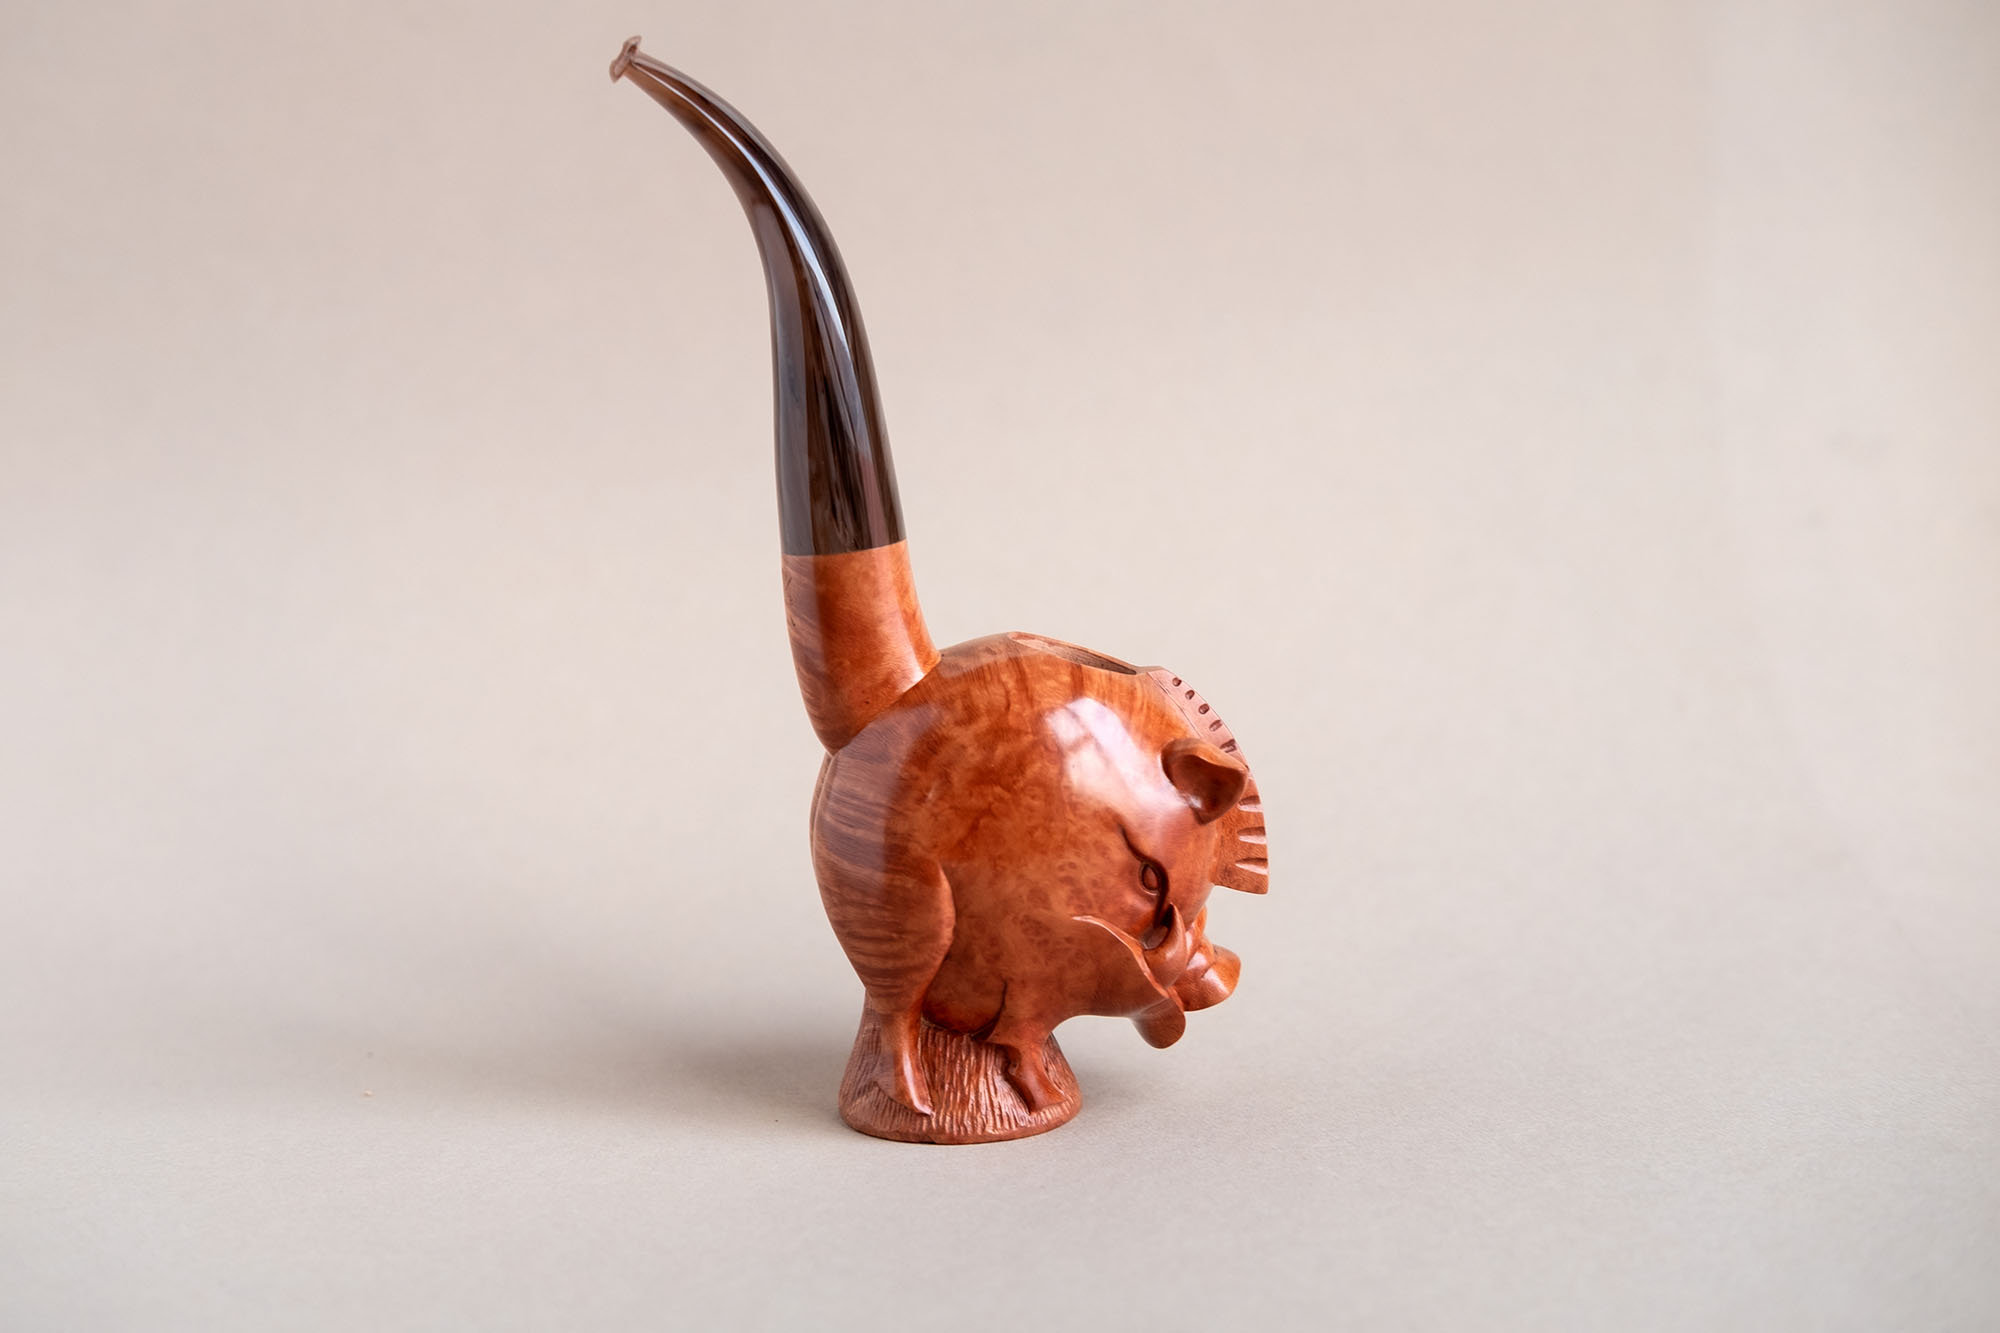 Angry boar pipe, a sculptural tobacco pipe hand crafted in briar by Arcangelo Ambrosi